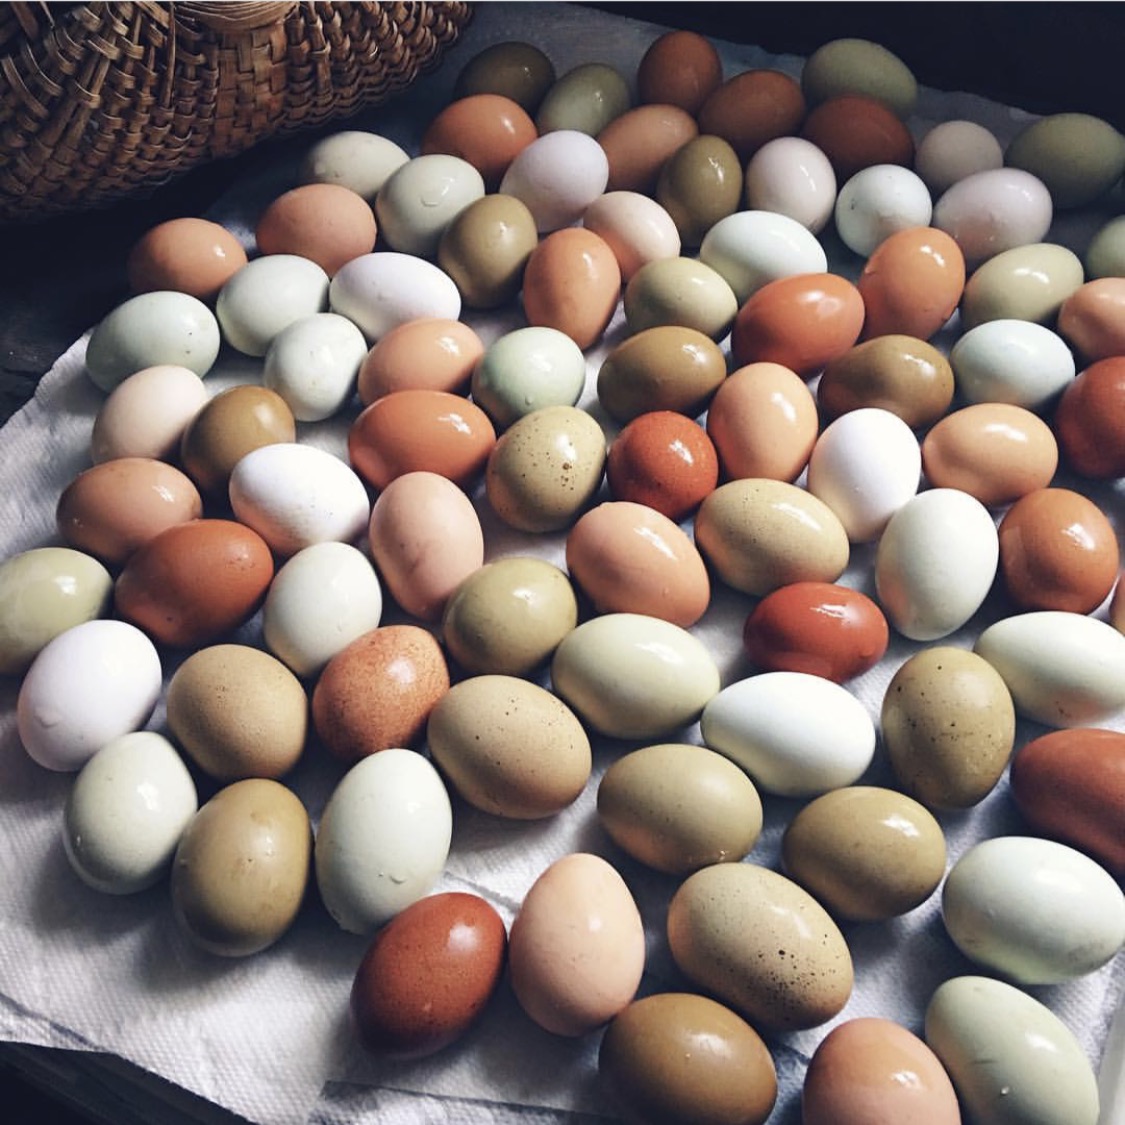 Five Marys "Easter" eggs - in their natural colors and hues!